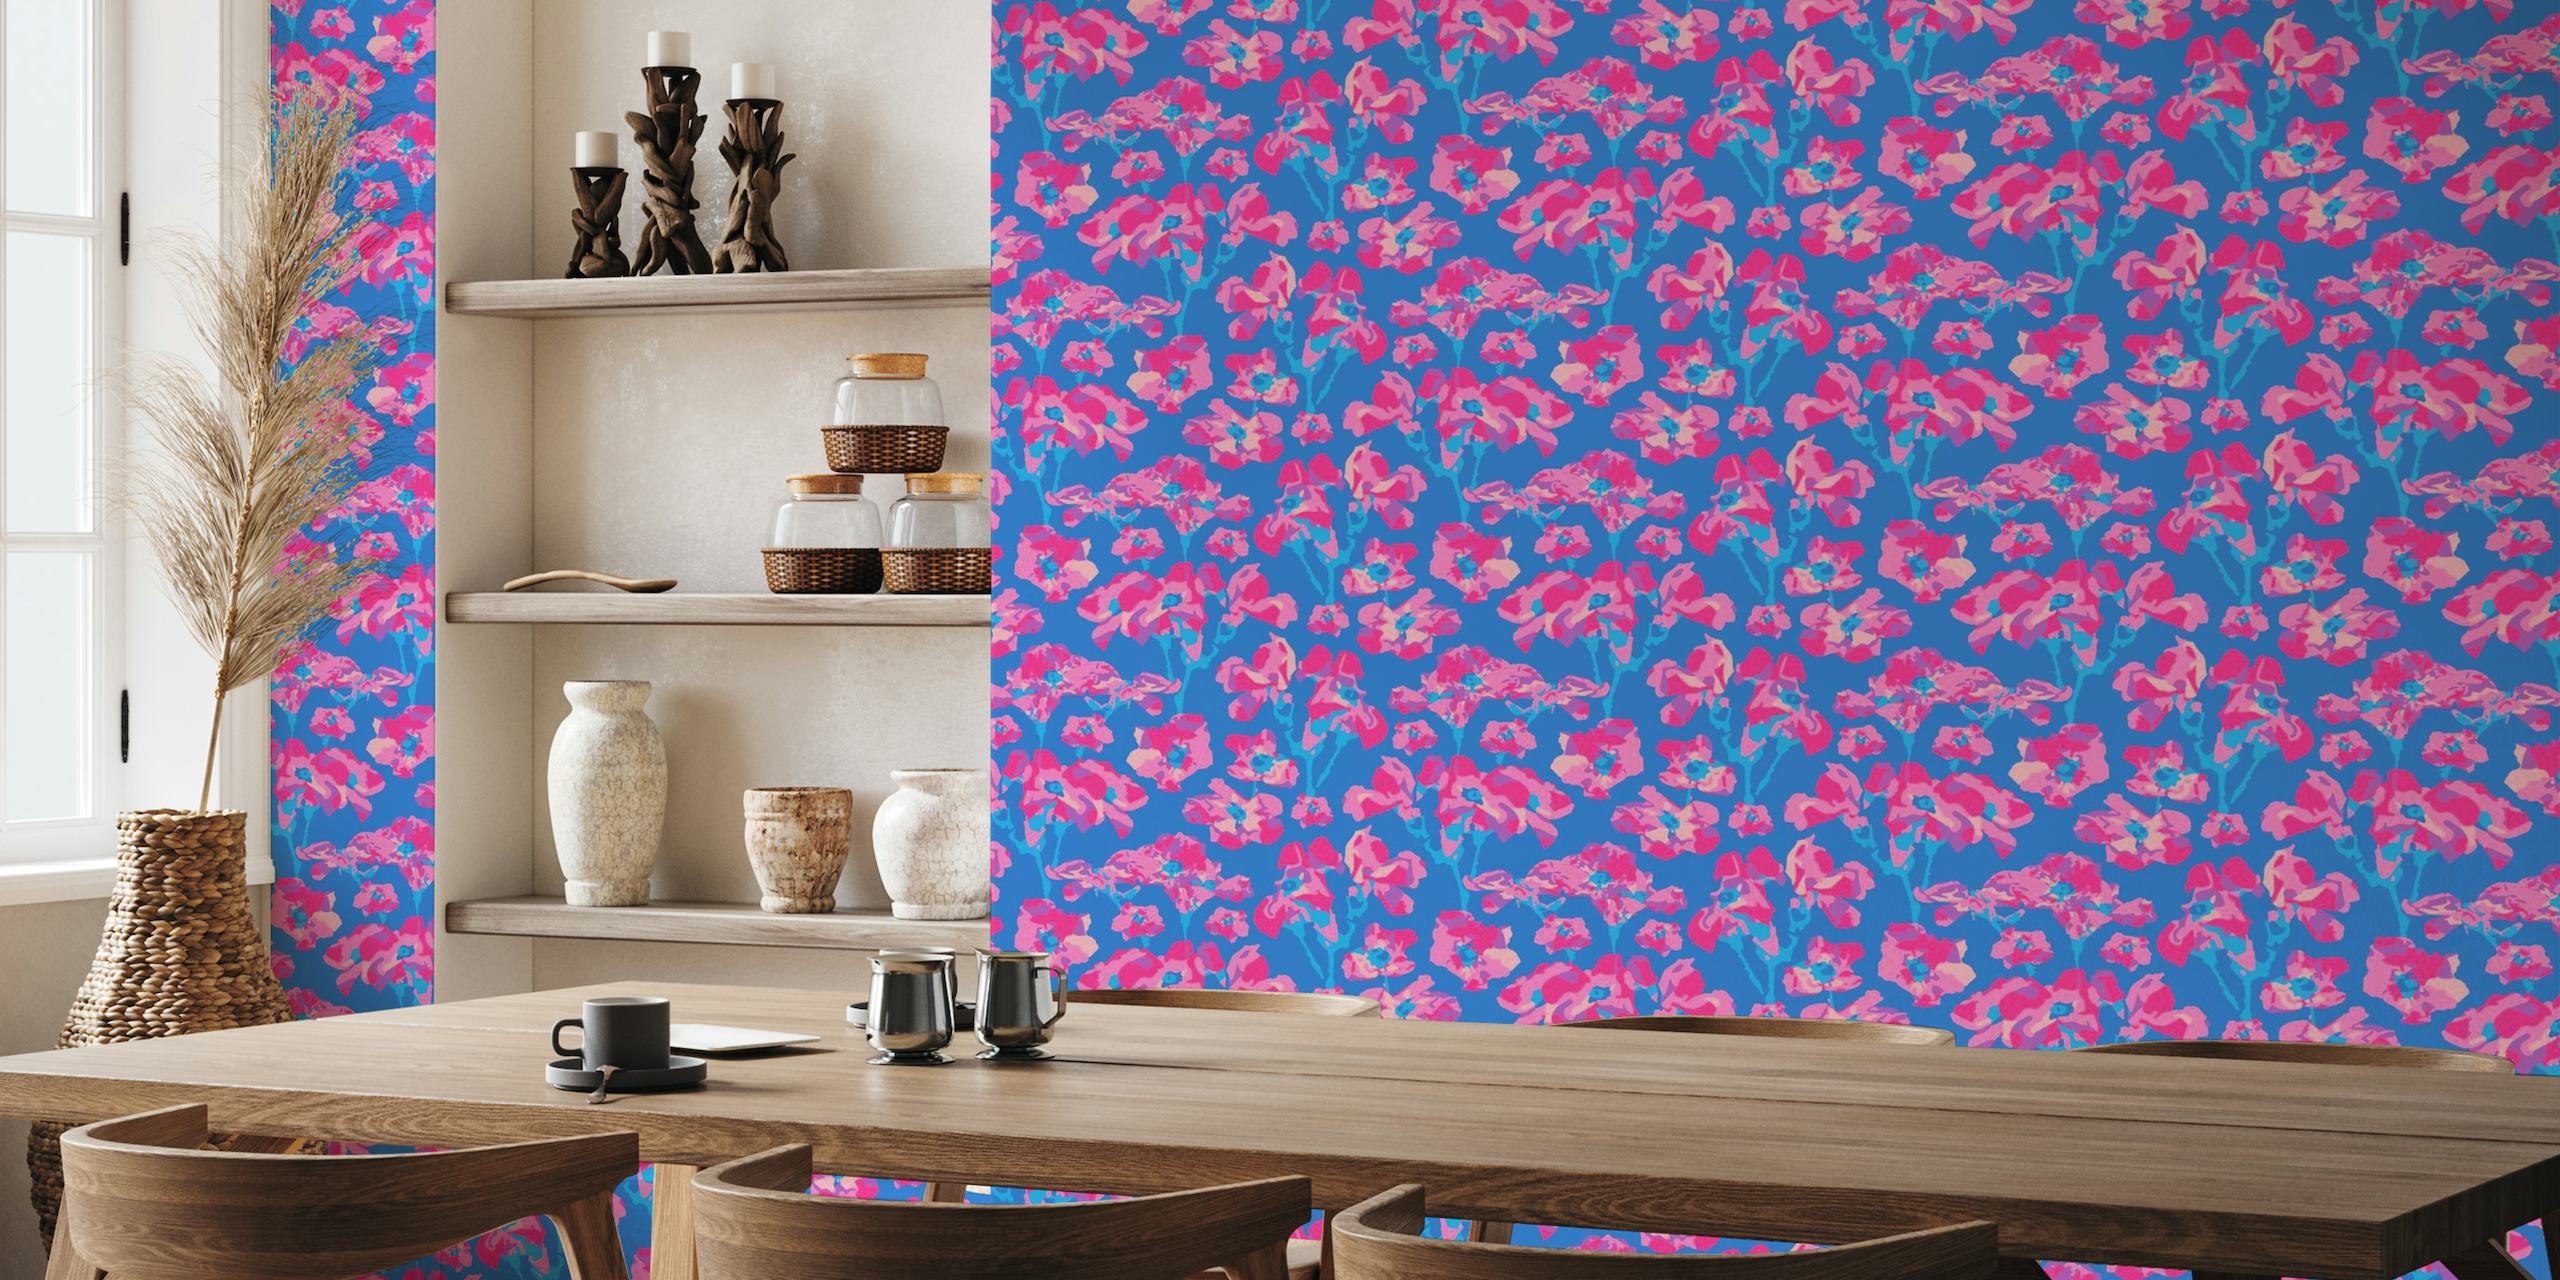 Abstract wild roses in pink and blue shades on a wall mural